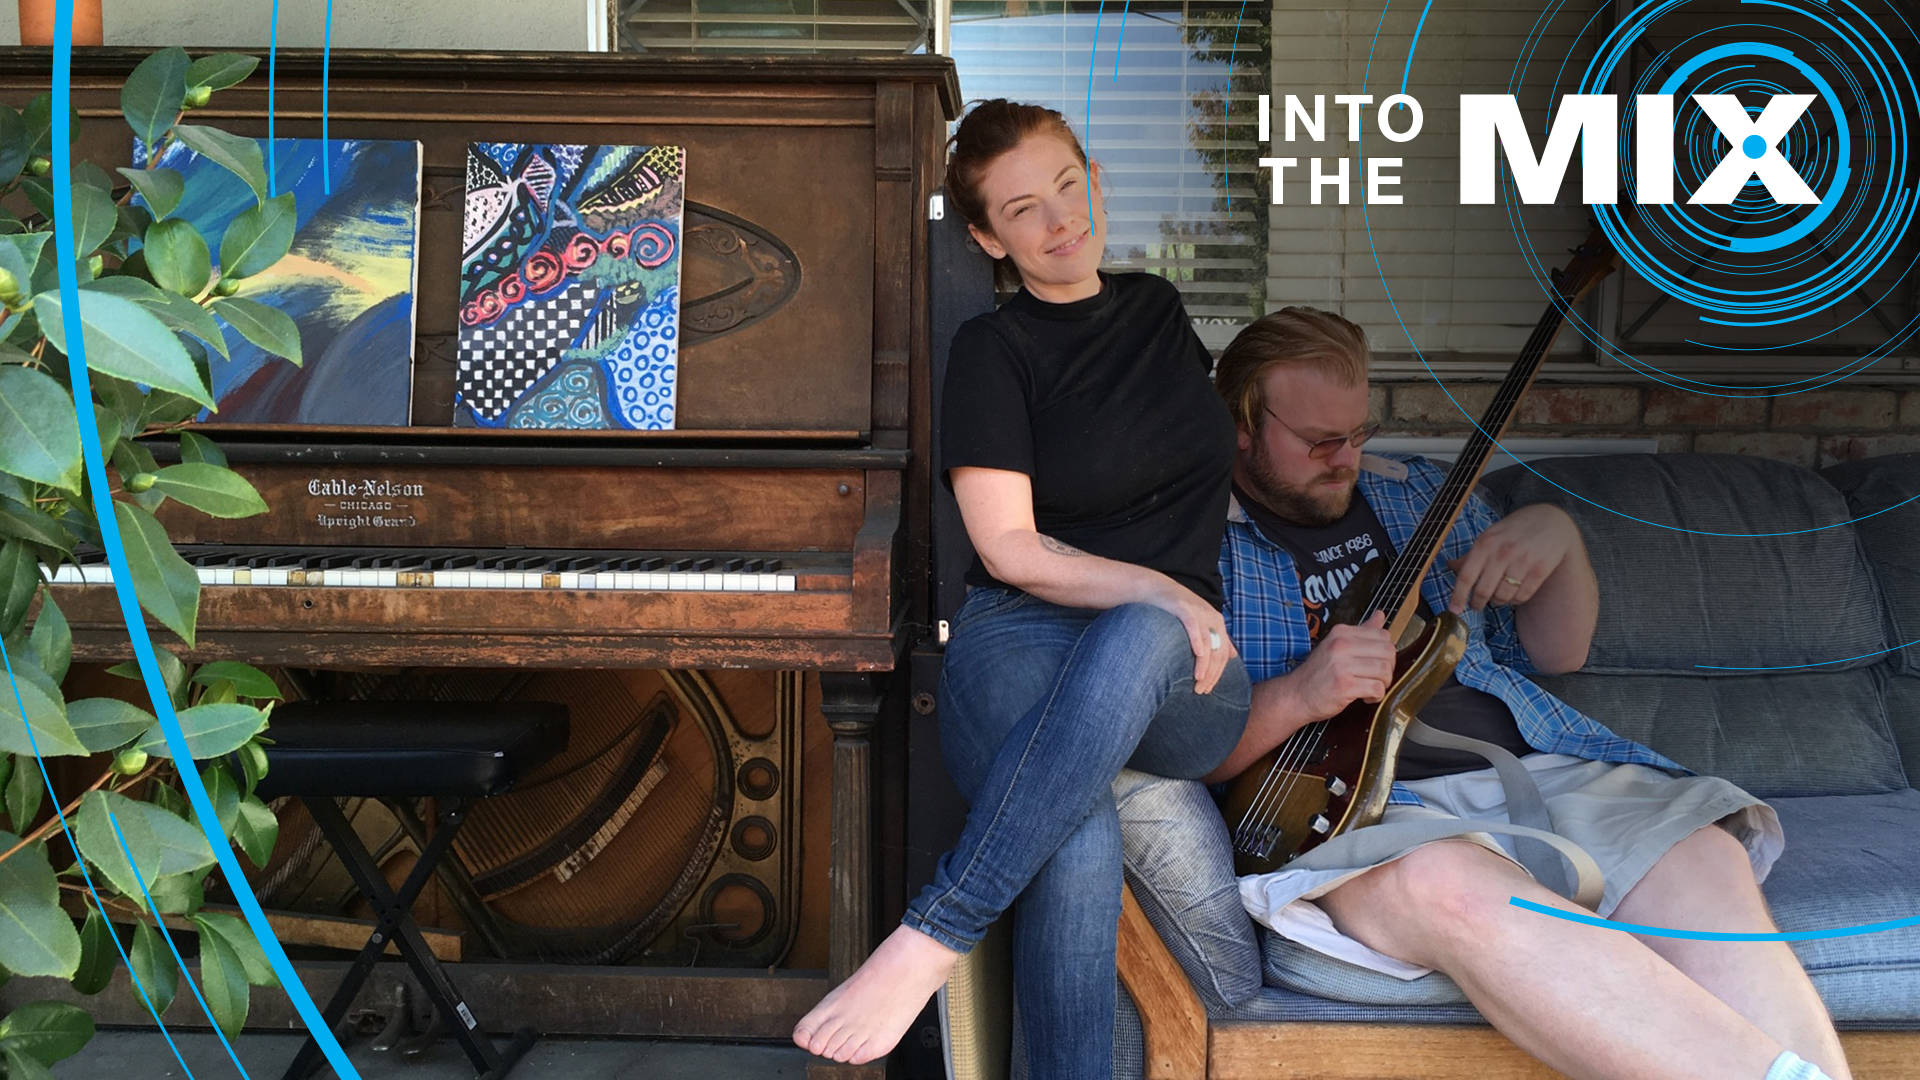 Blues musician and producer Kid Andersen and his wife, singer Lisa Leuschner, hang out on the porch outside their home in San Jose. Photo: Rachael Myrow/KQED